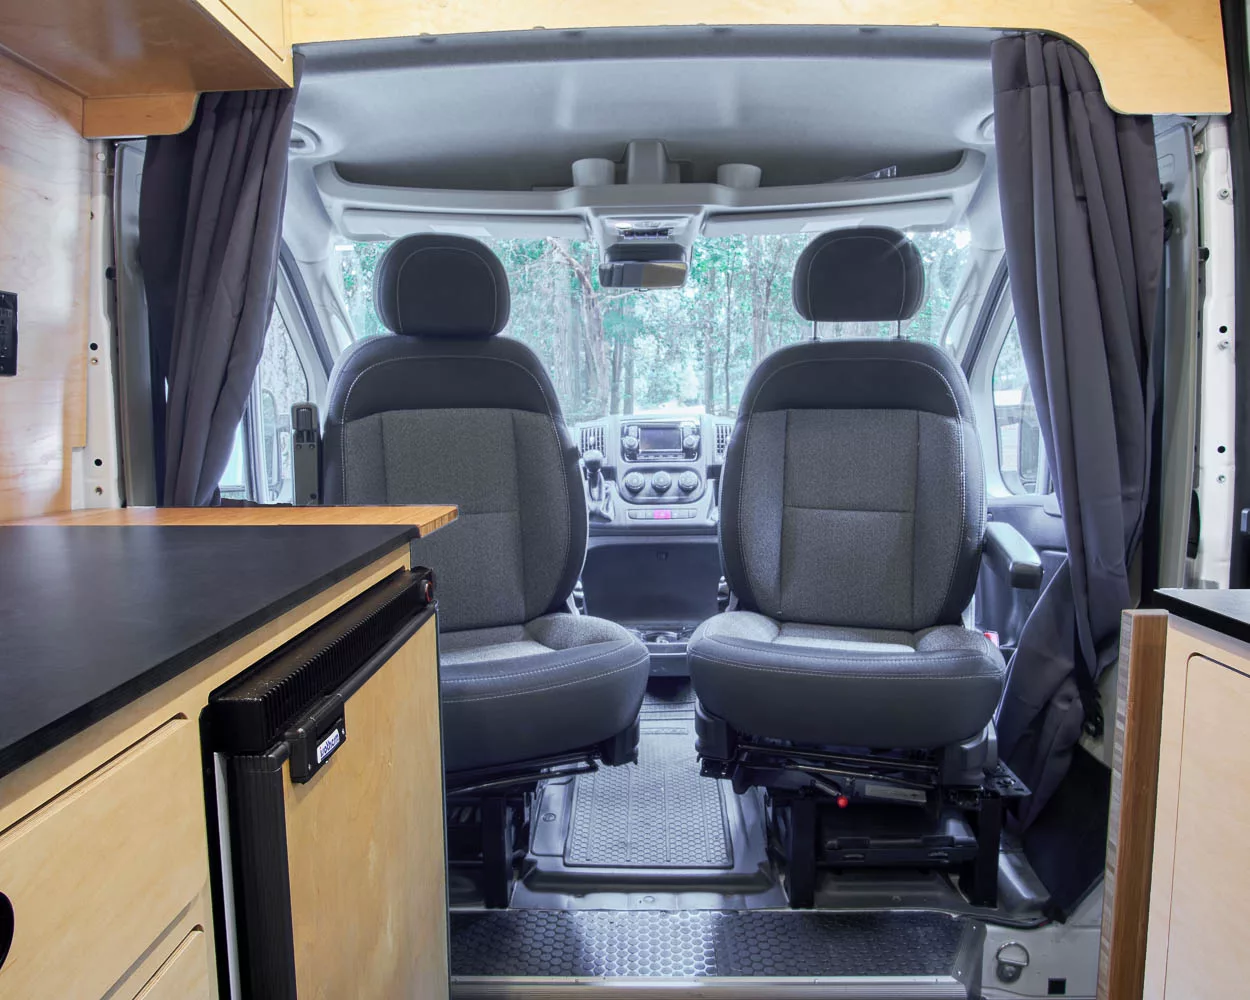 Step inside perfection on wheels! This ProMaster is packed with features that make it feel more open and homey than most van conversions. All in the 136-inch wheelbase package. Say goodnight to mediocre builds!